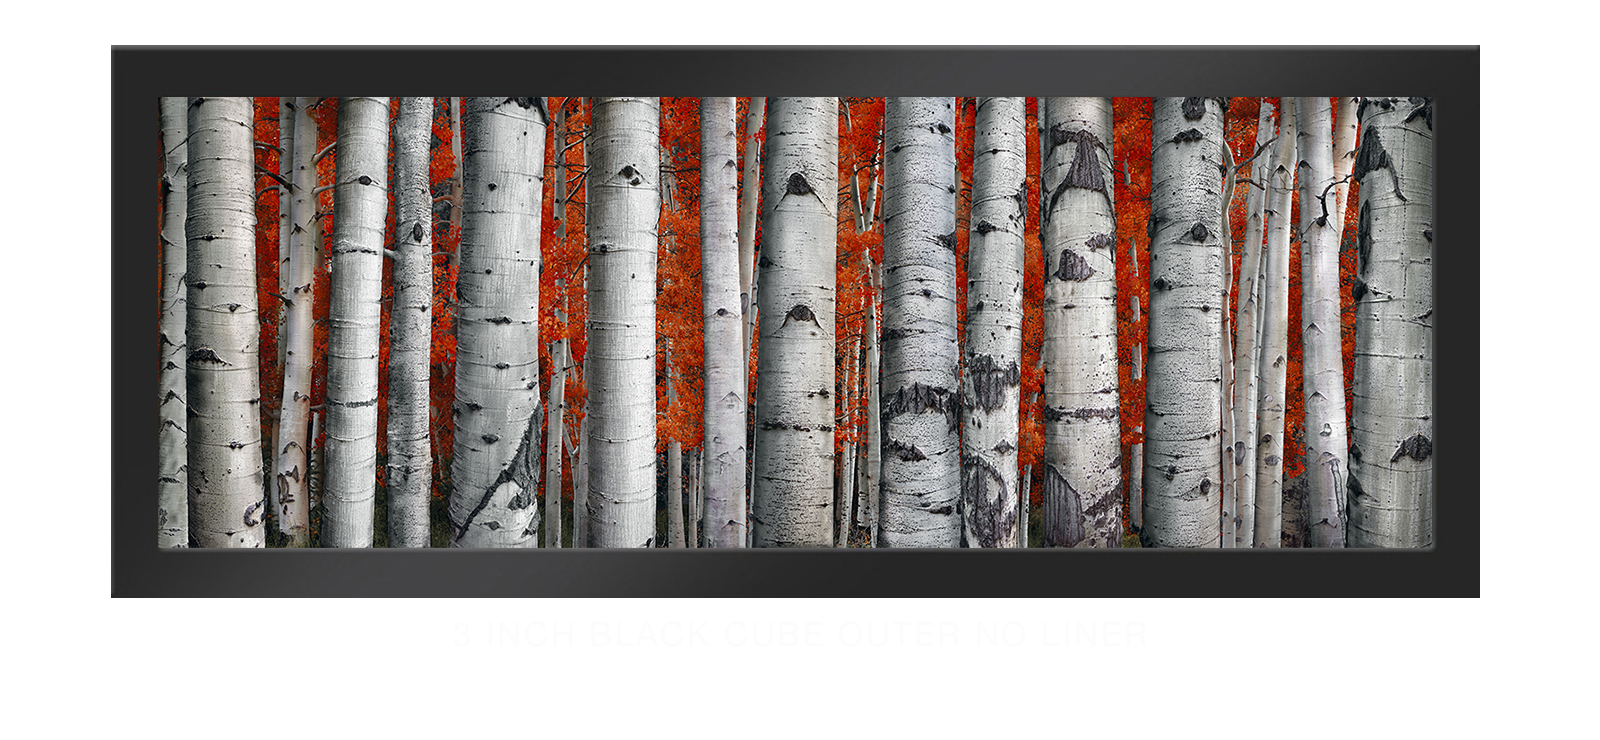 13ASPEN 3 Inch Black Cube Outer w_No Liner T